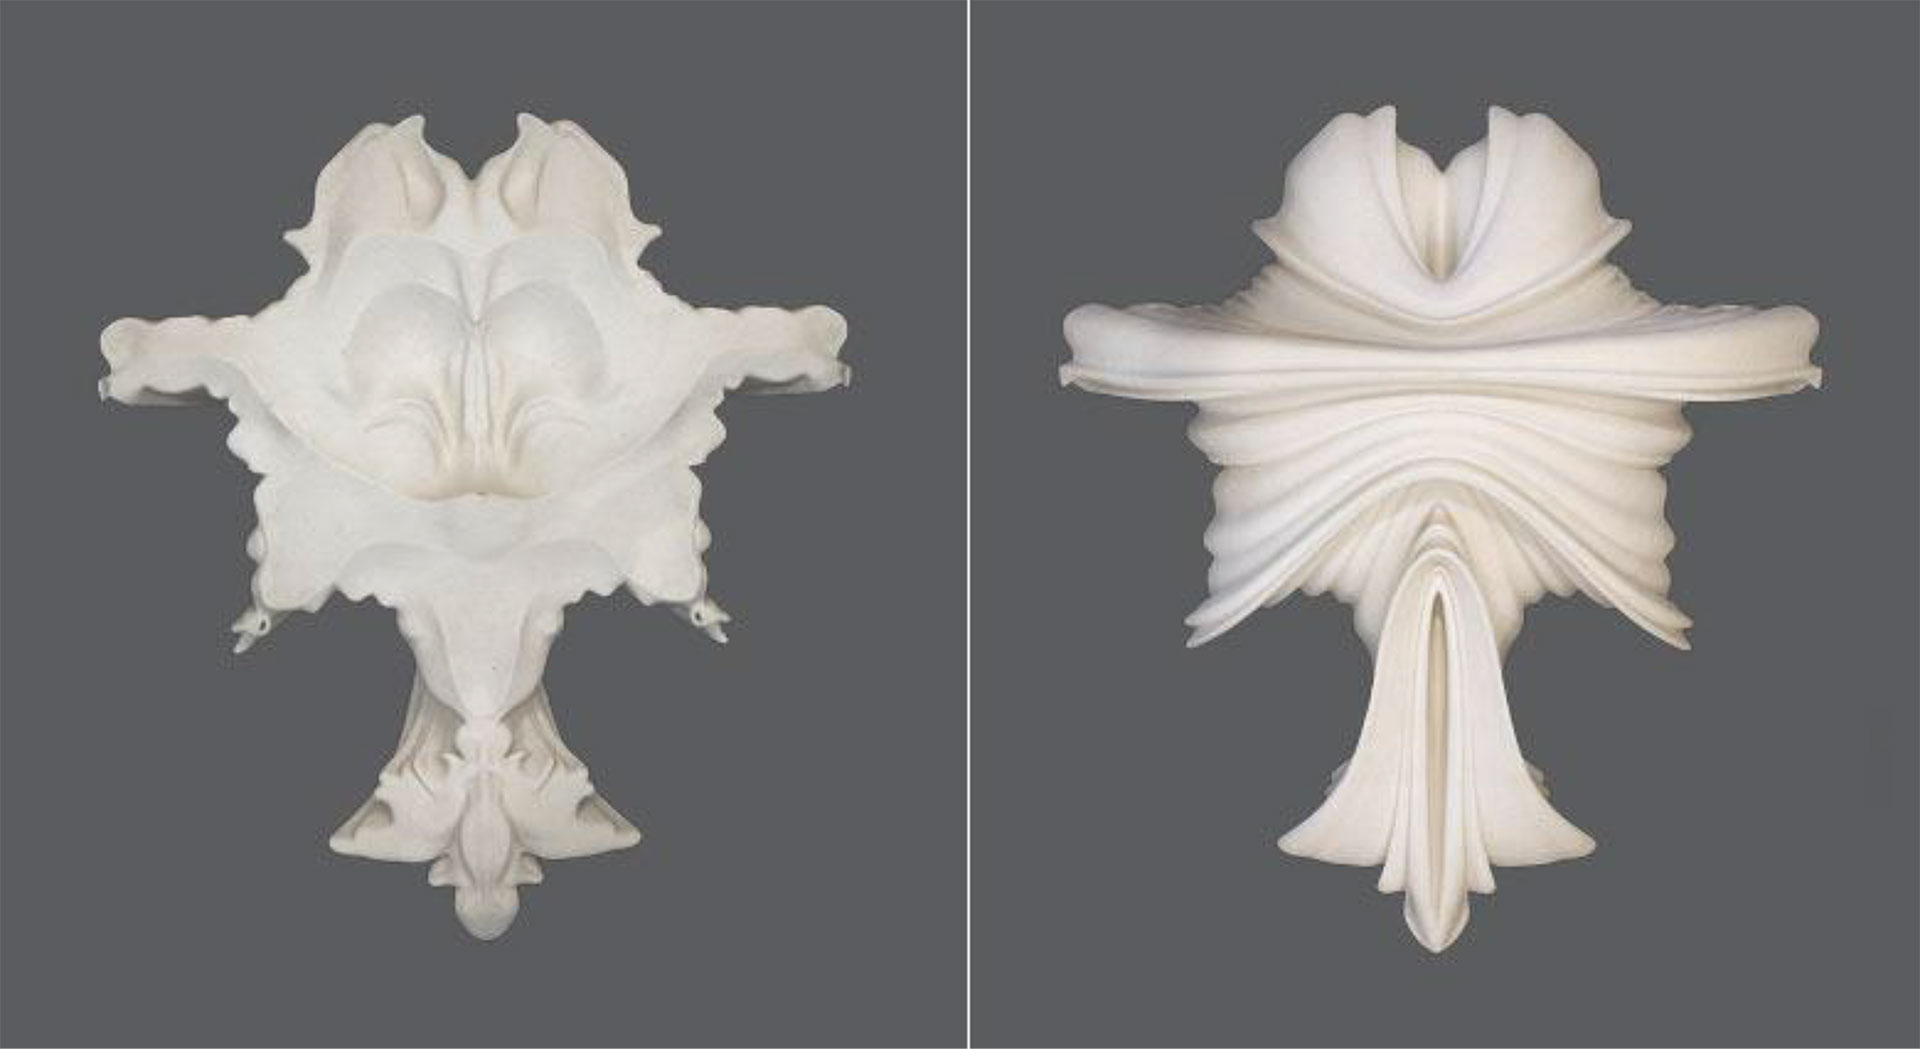 Suzanne Anker, Rorschach series (Tarantula), 2004-05. Rapid Prototype Sculpture. Plaster and resin, Edition of 3. 9.5” x 11” x 3.5”. $ 3,000. Also available in 4.5” x 5” x 1”. Plaster and resin; ivory white or painted black, Edition of 6. $500.